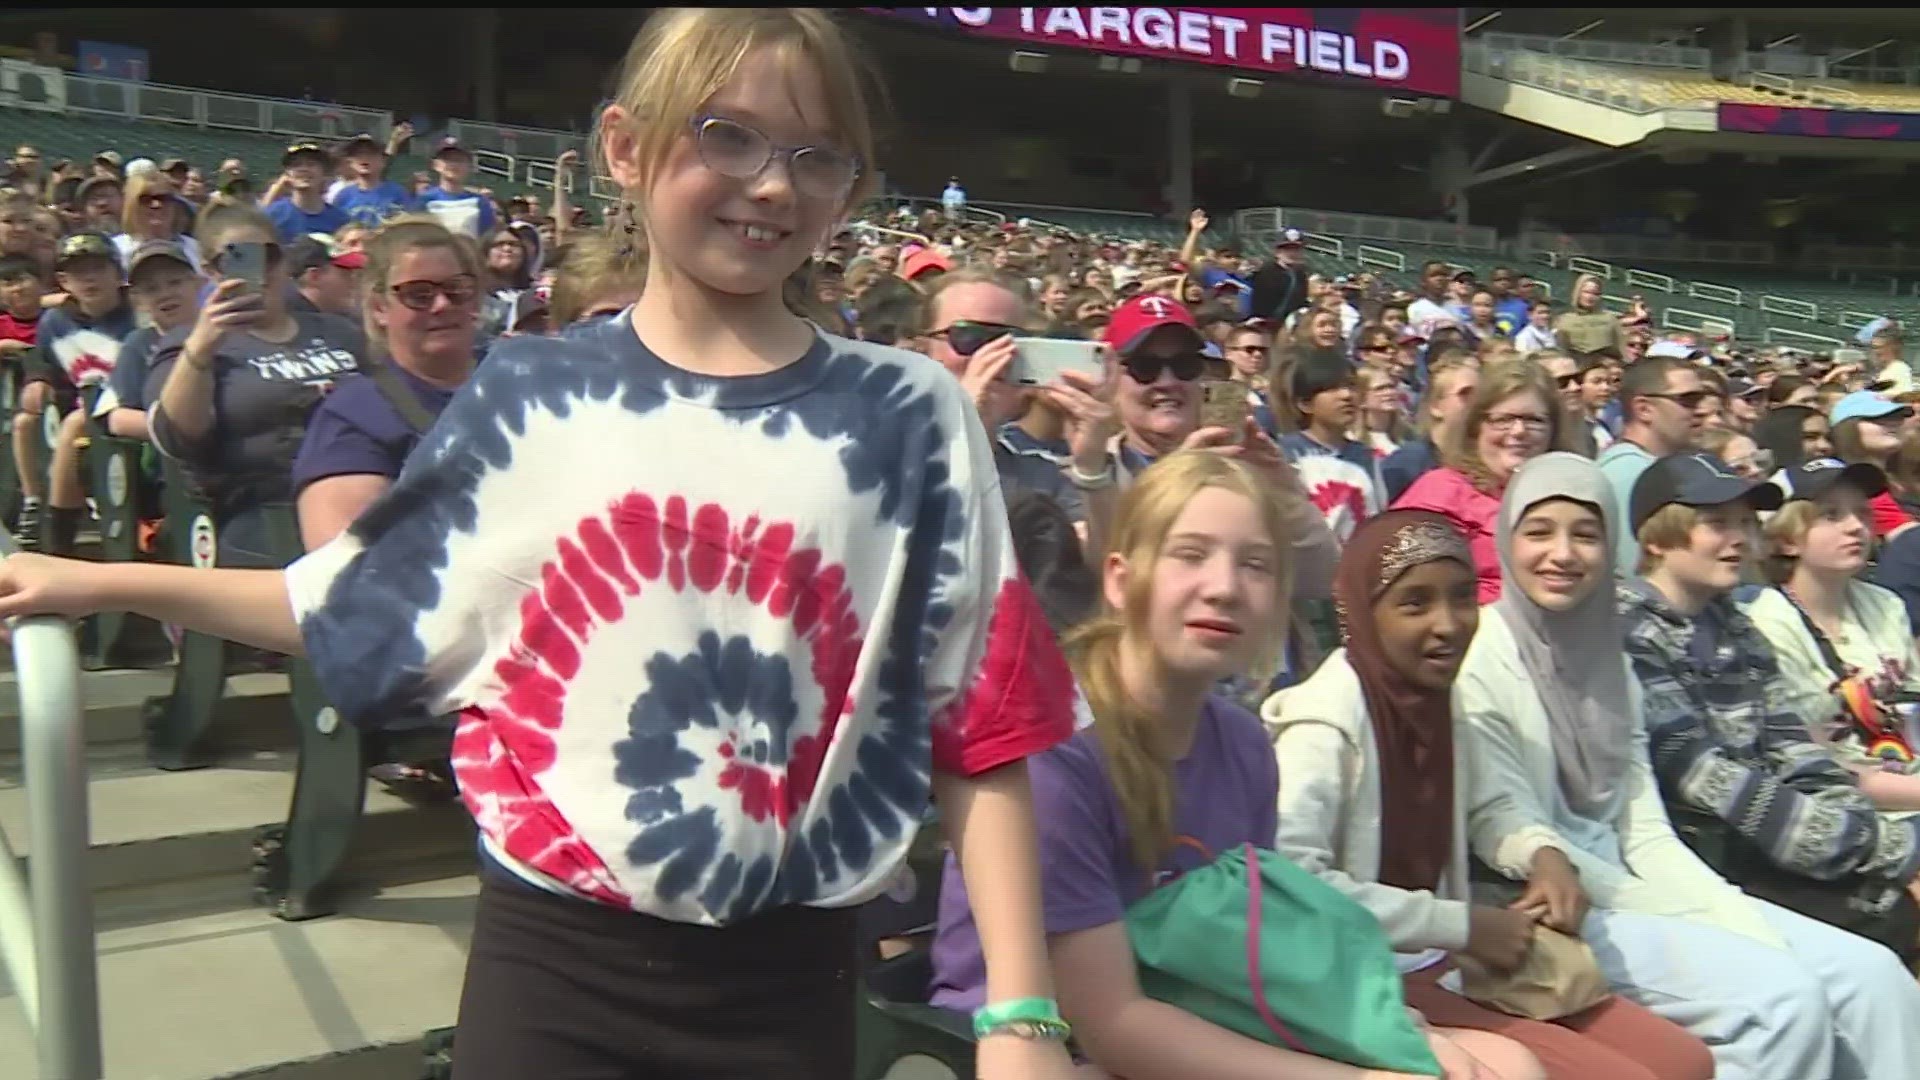 "Weather Day" has been an annual tradition at Target Field since the field first opened in 2010.